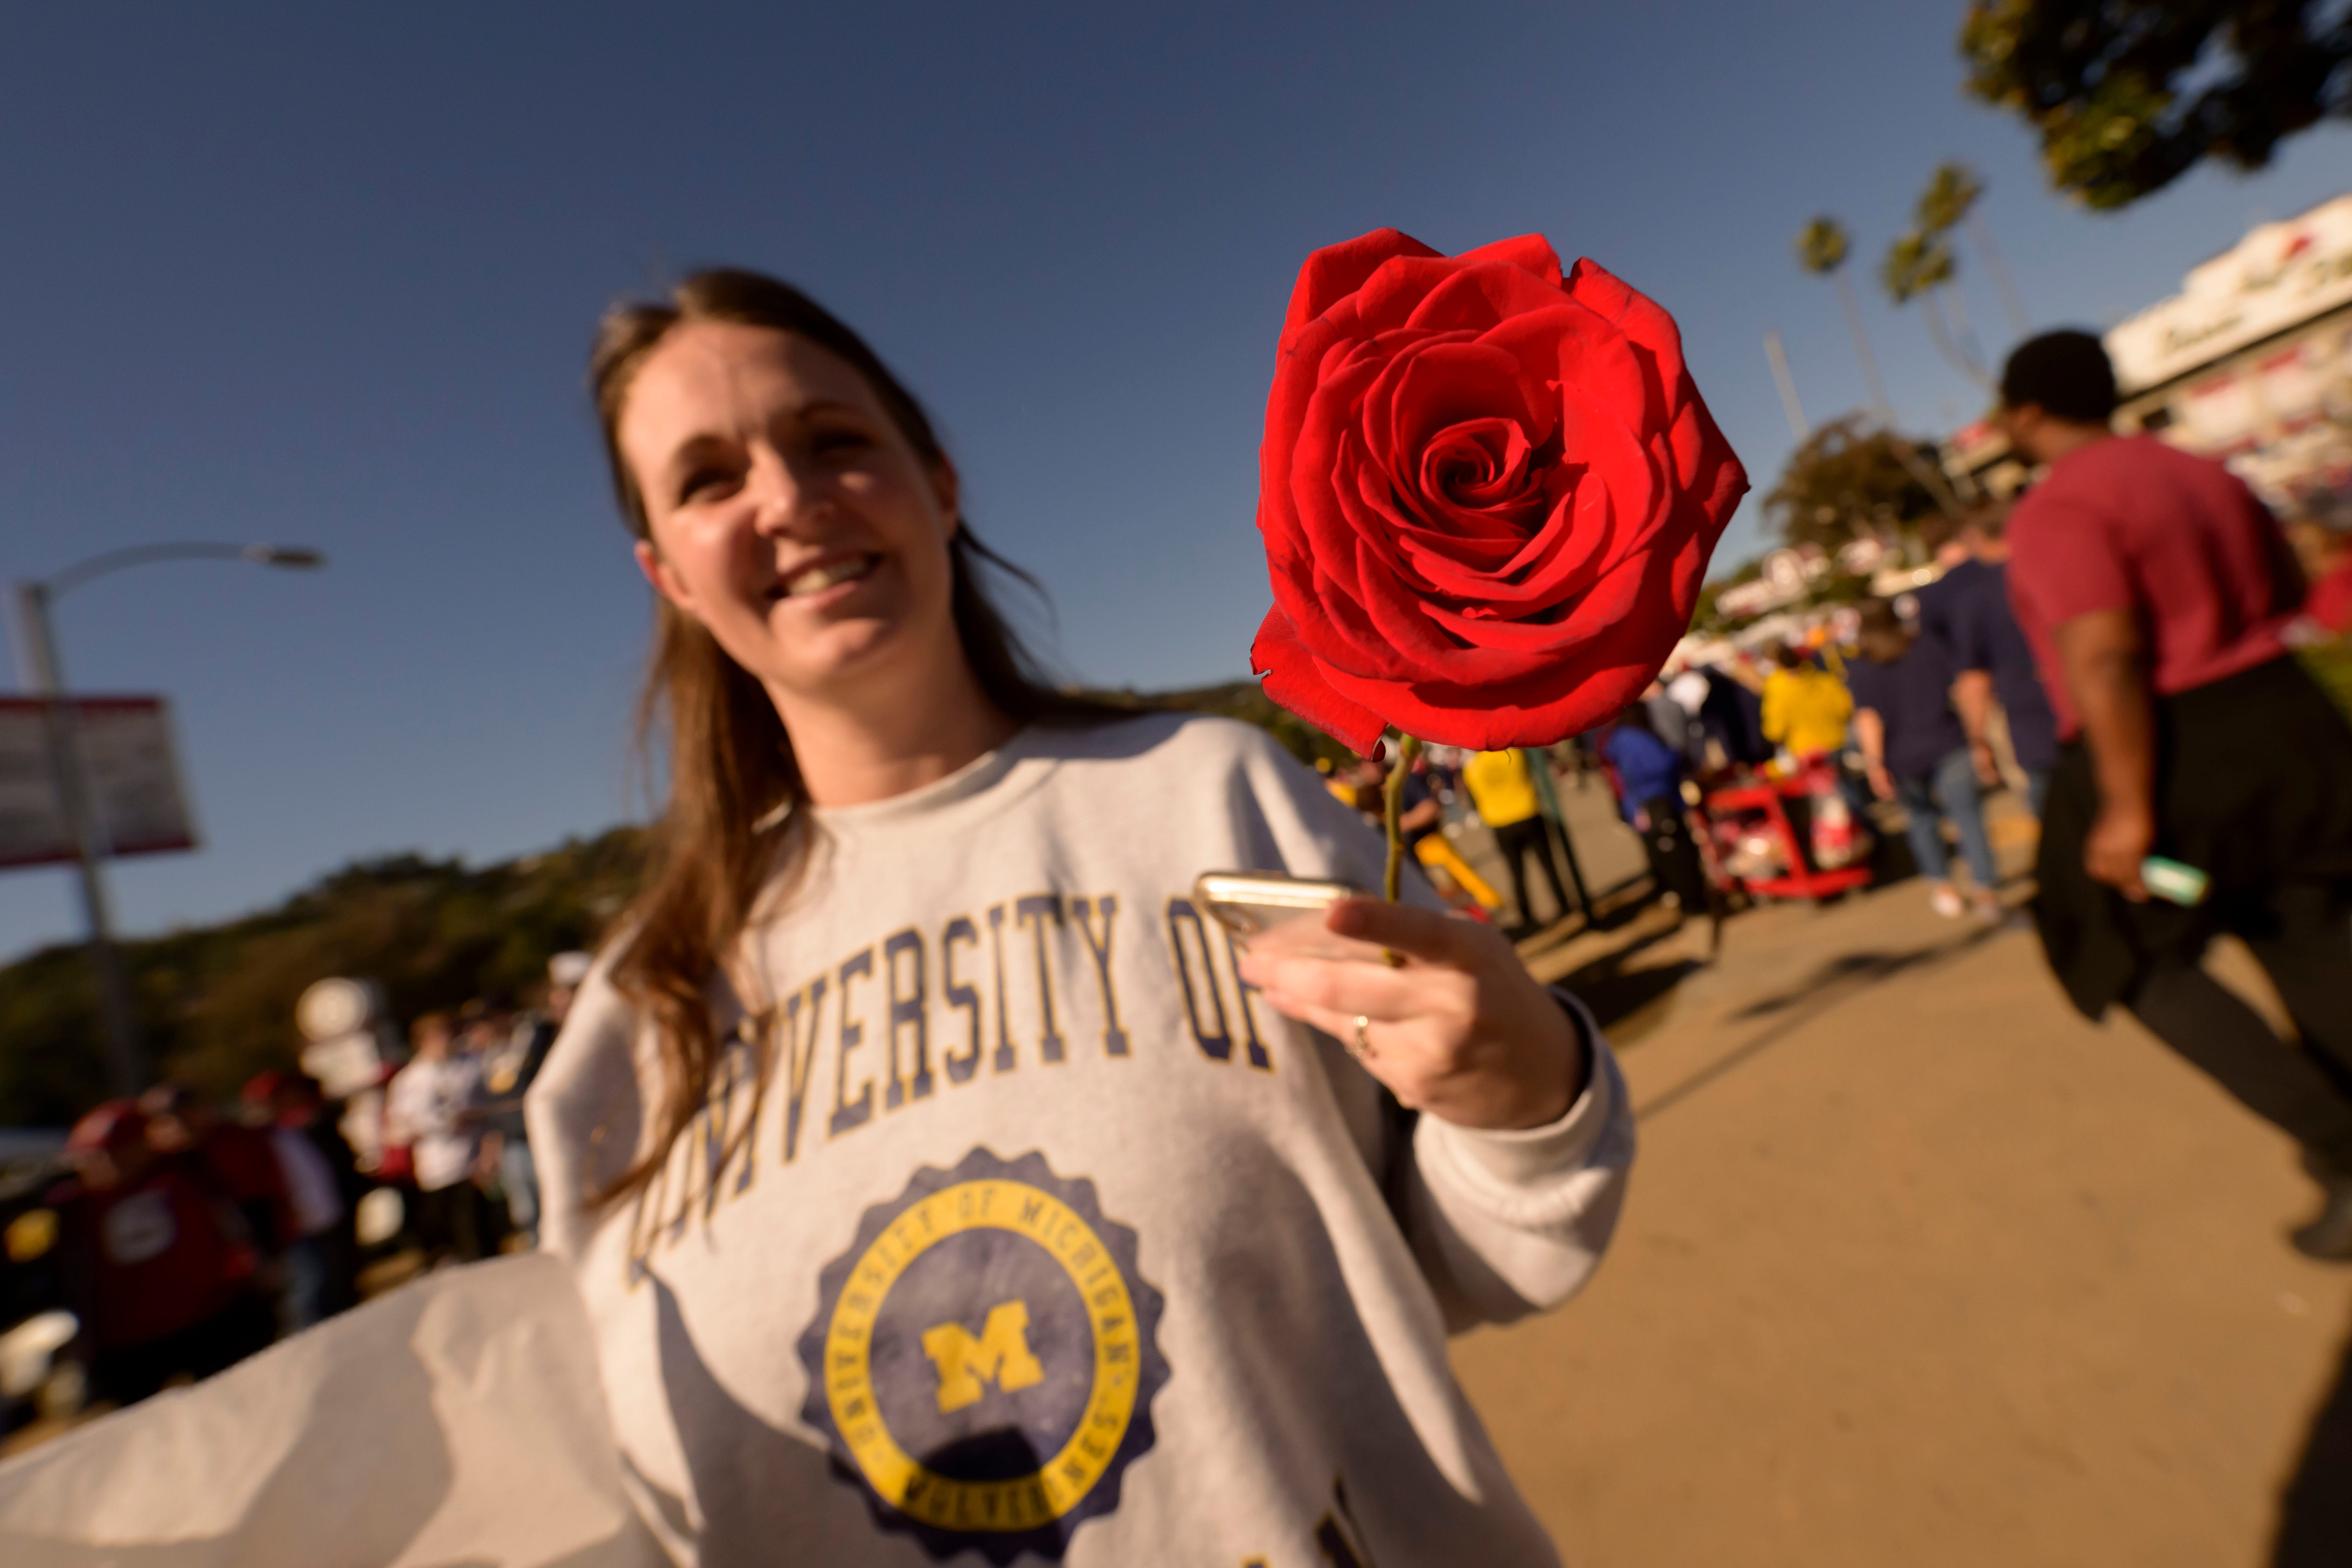 Holly Dubinsky, of Ada, walks around outside the stadium with a rose before the start of the Rose Bowl, in Pasadena, California on Jan. 1, 2024.